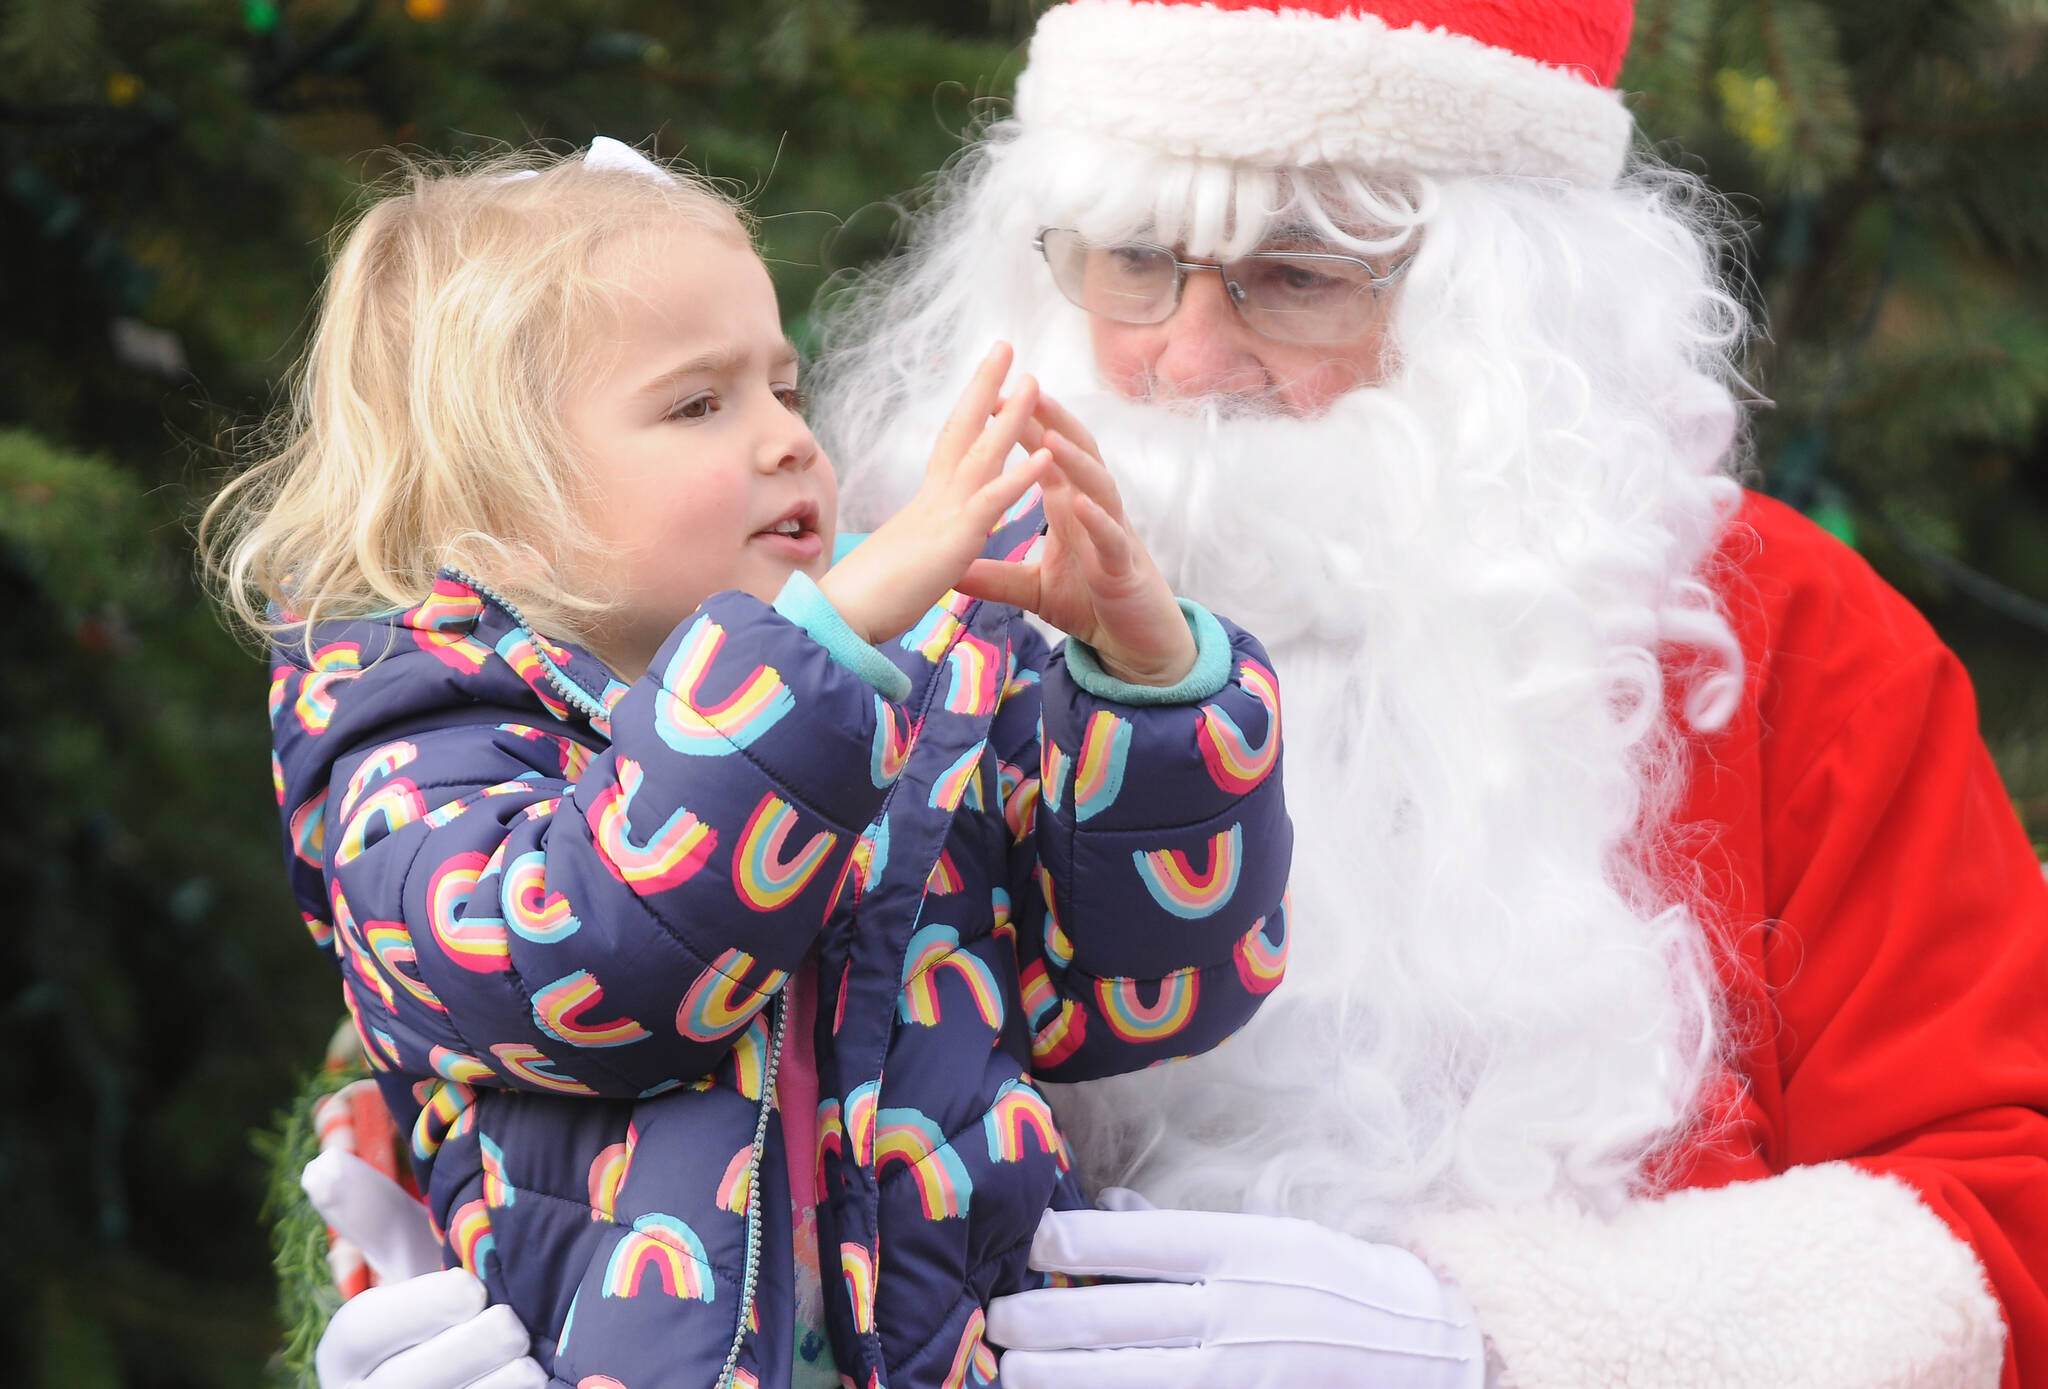 Sequim Gazette photo by Michael Dashiell / Finley Loveless, 3, of Sequim, spends some quality time with Santa Claus (Stephen Rosales) at the Hometown Holidays event Saturday afternoon in downtown Sequim.